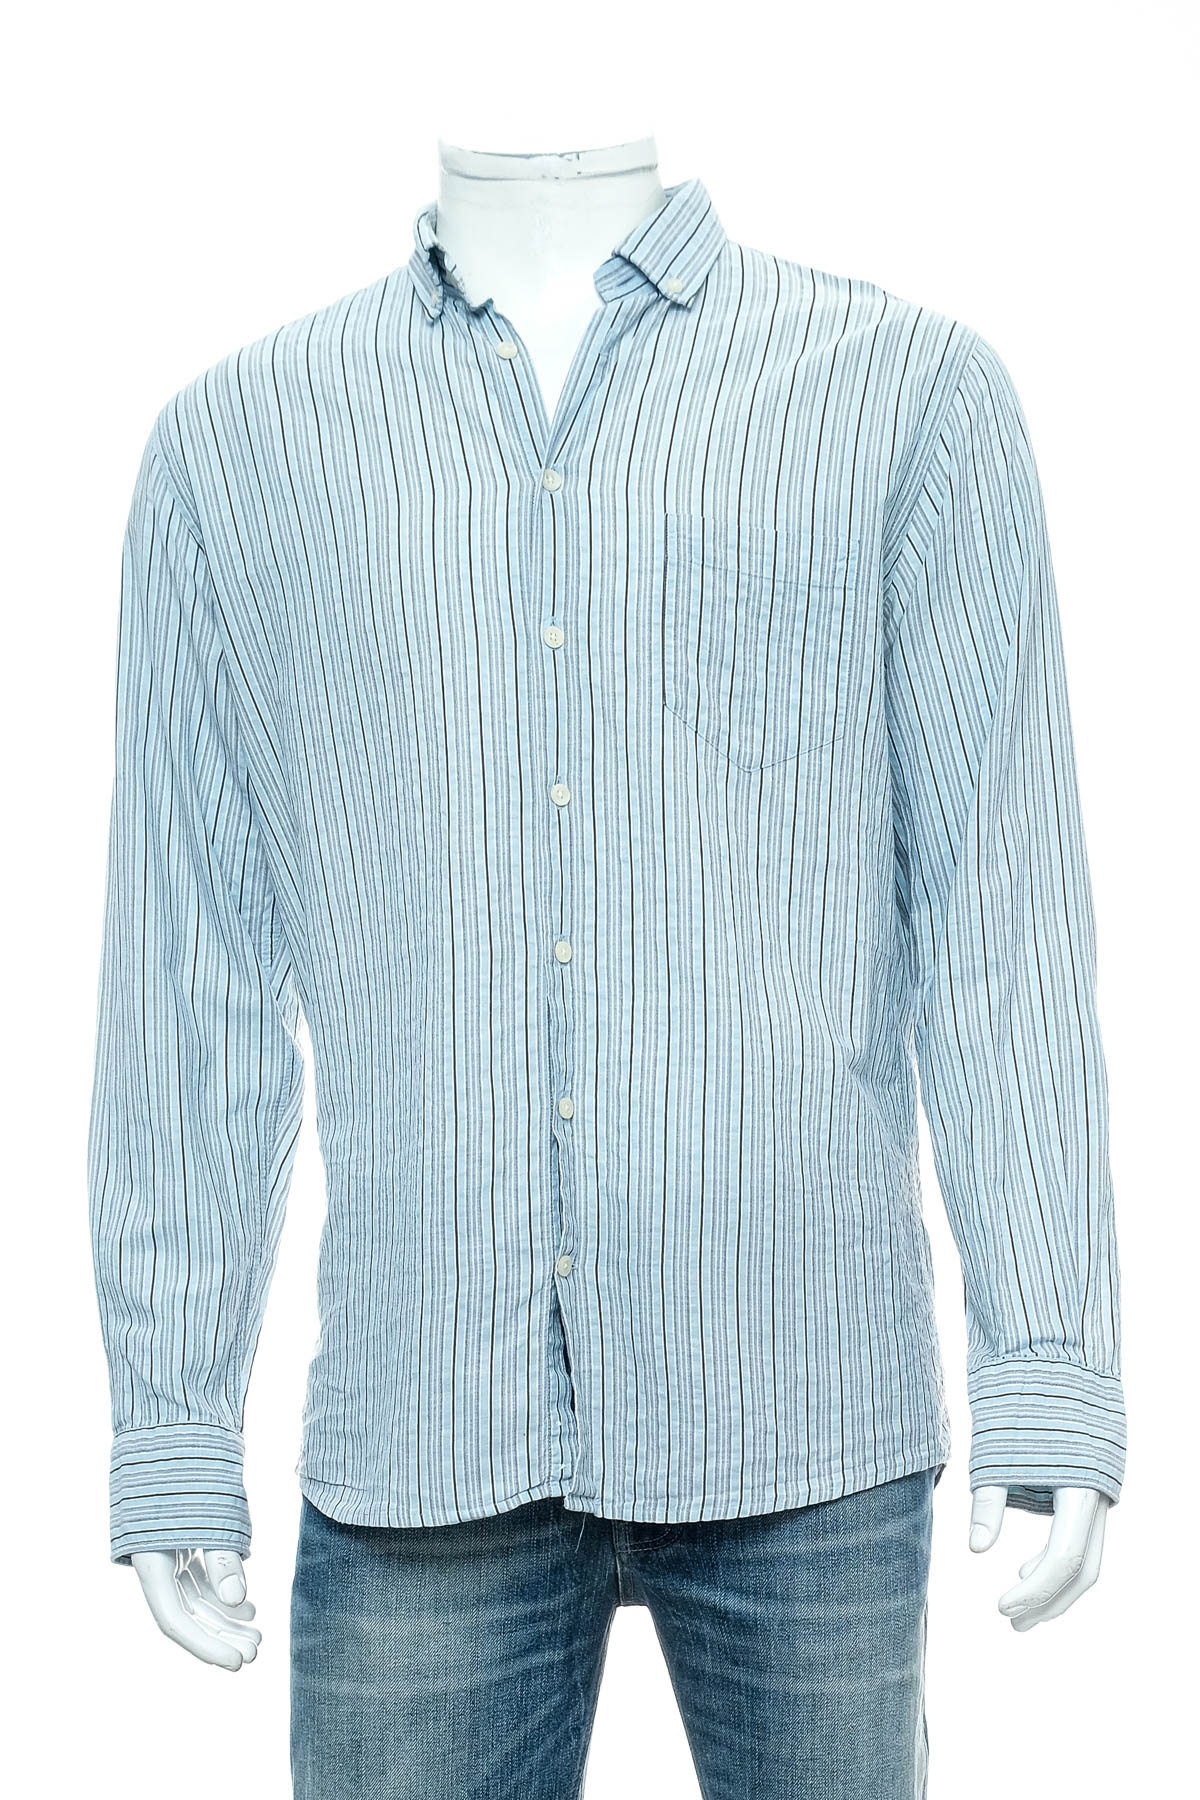 Men's shirt - Pure by H.TICO - 0